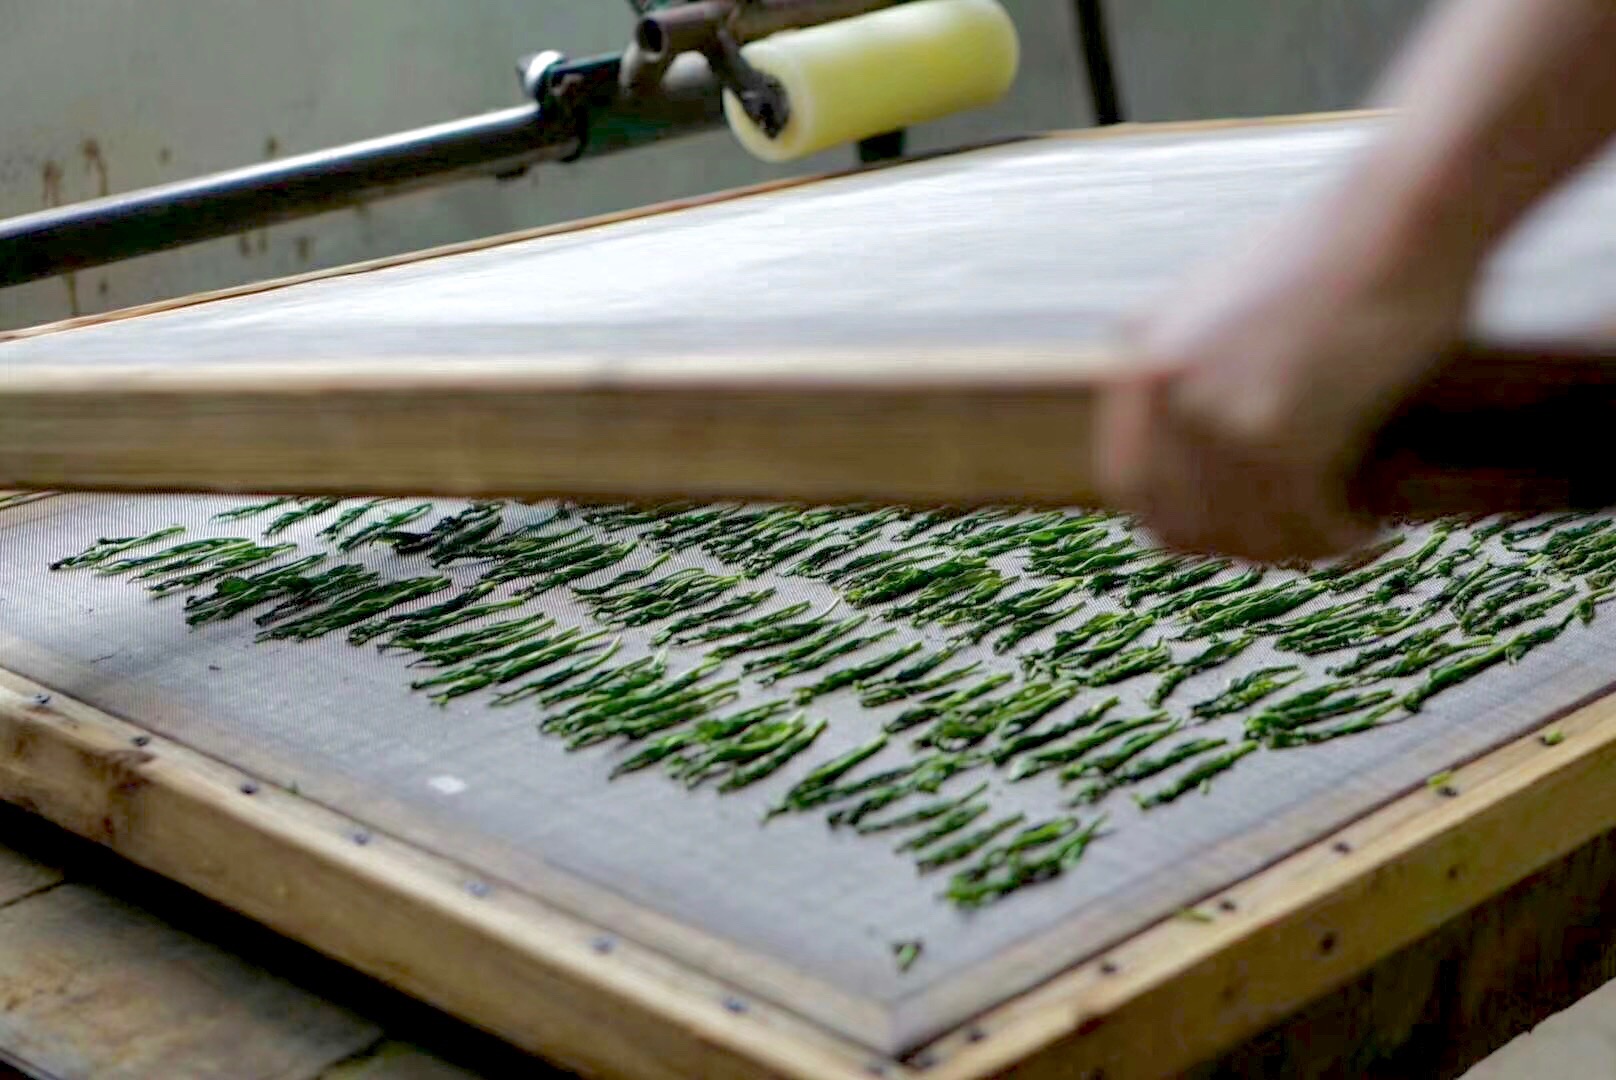 Two large flat squares of fine steel mesh in a wooden frame, being pressed together to sandwich the long leaves of Tai Ping Houkui green tea between.